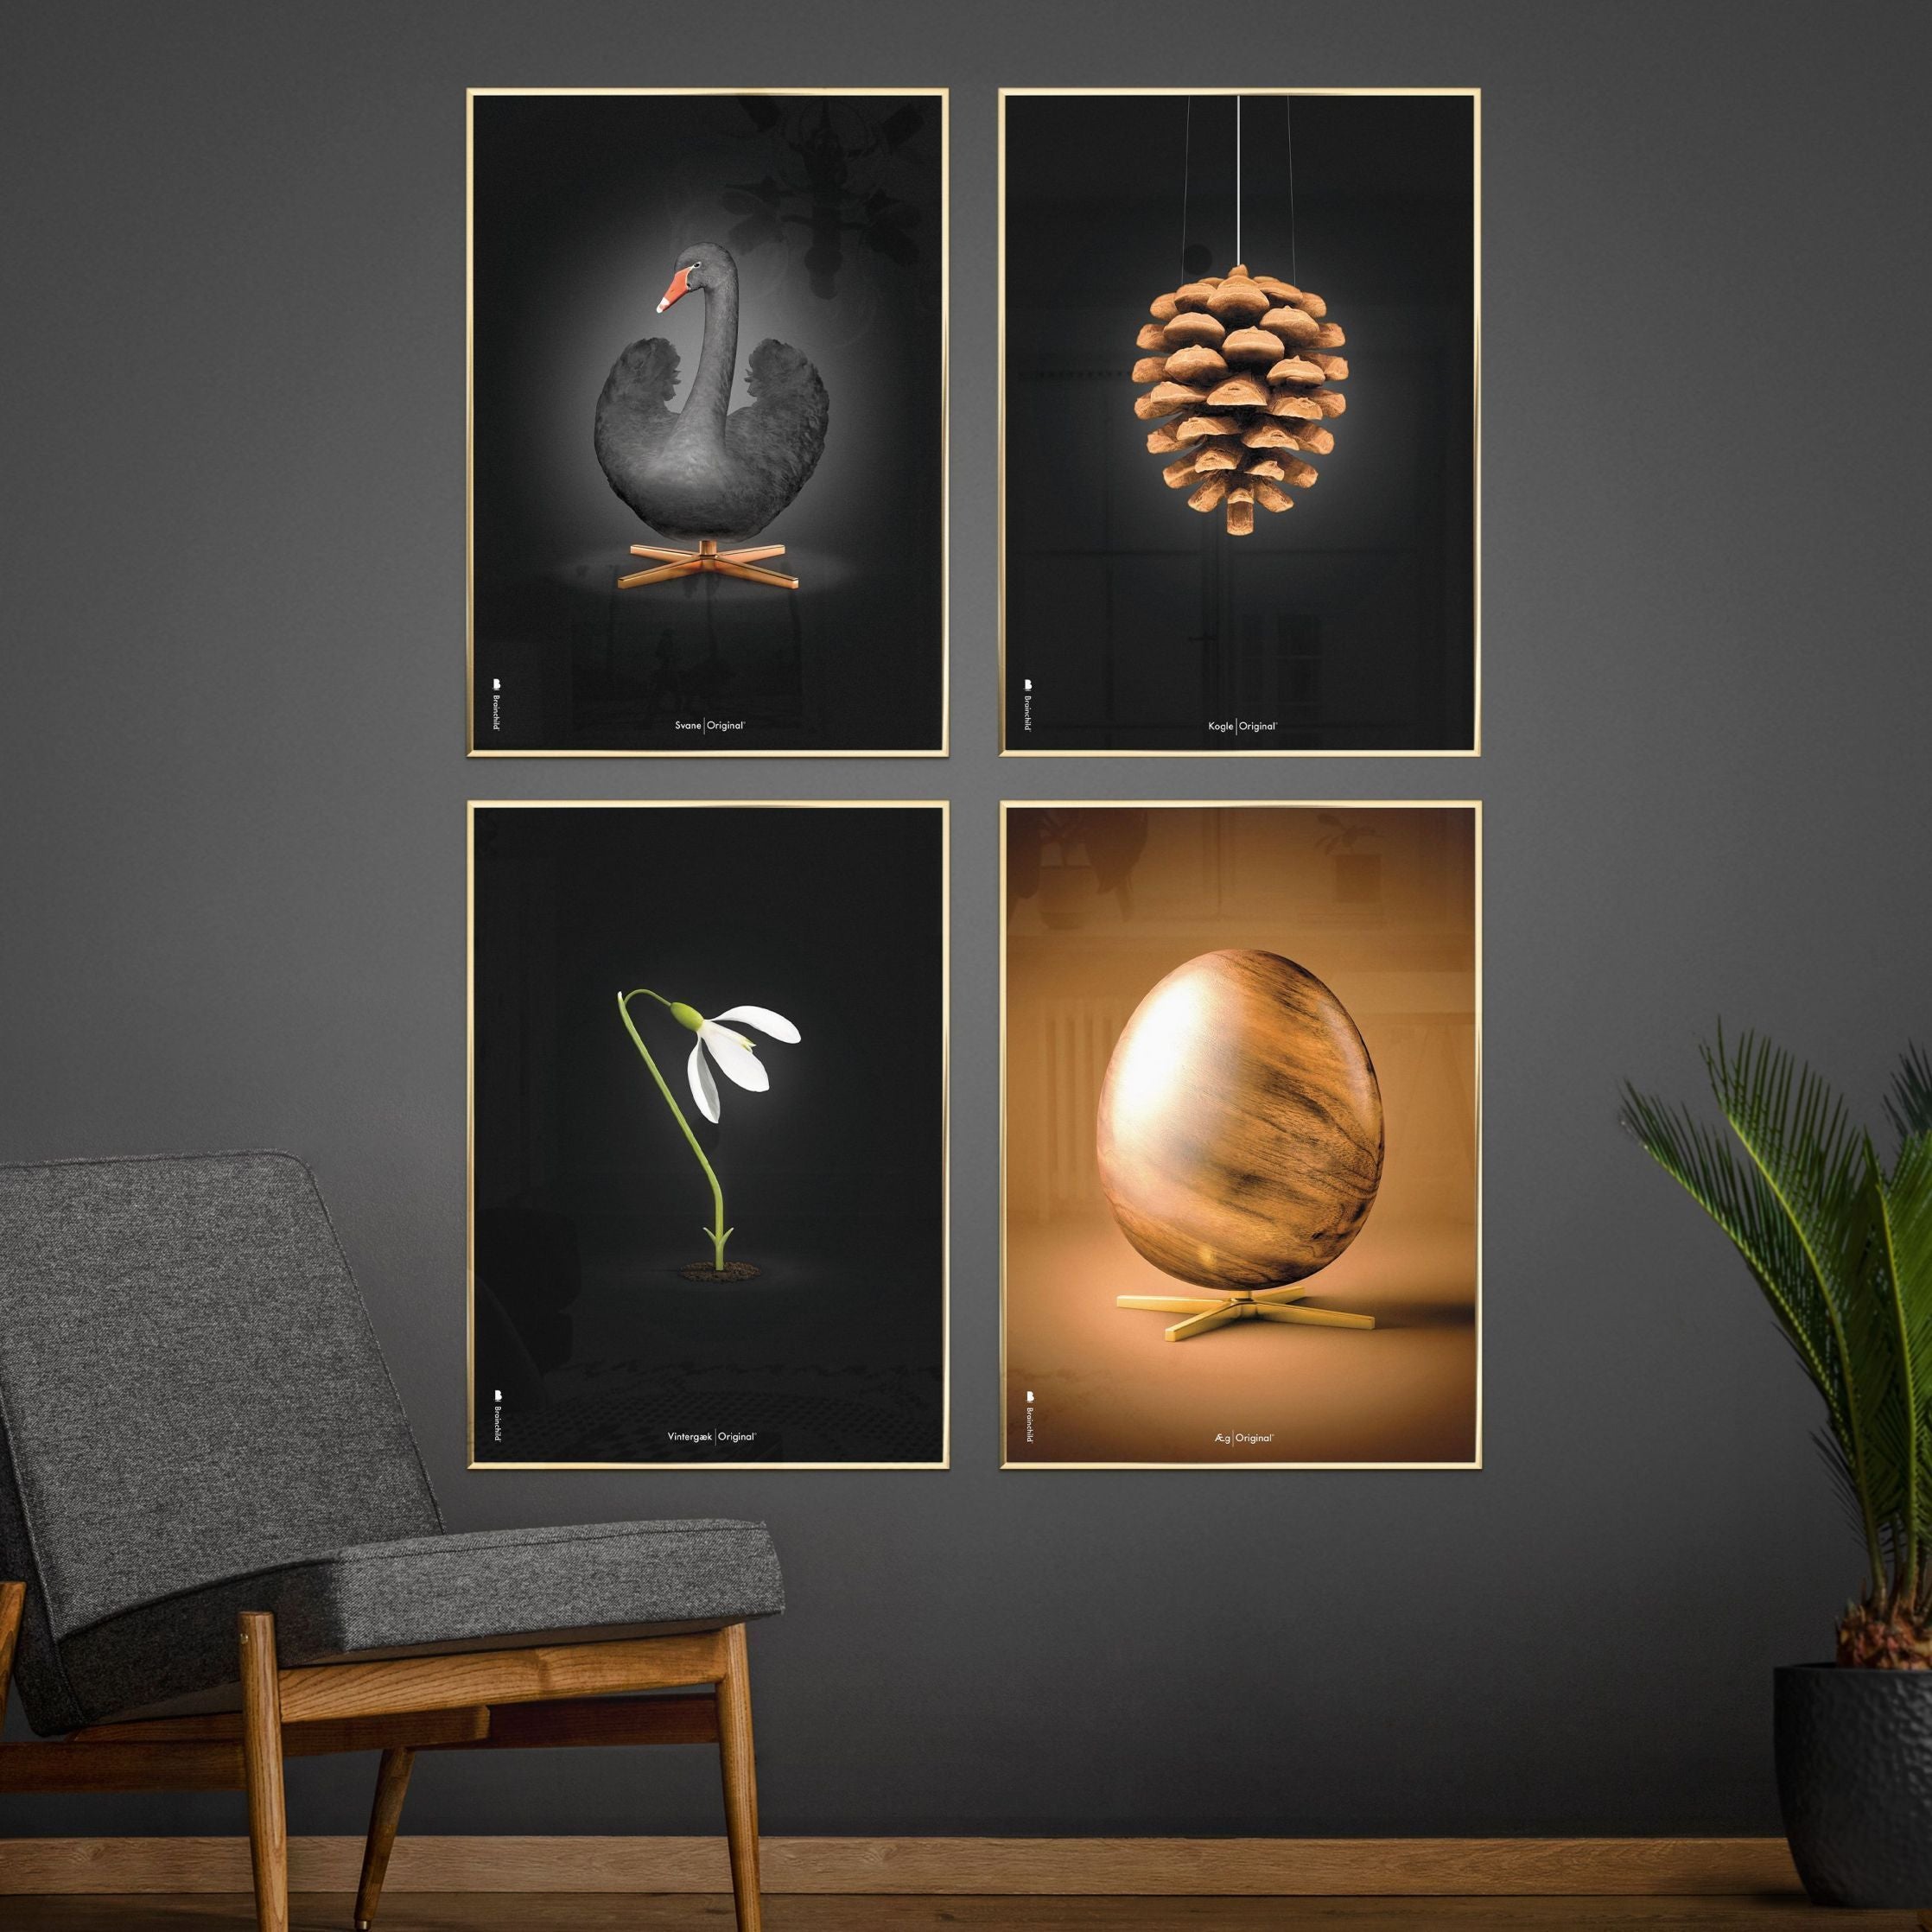 Brainchild Swan Classic Poster, Frame In Black Lacquered Wood 30x40 Cm, Black/Black Background